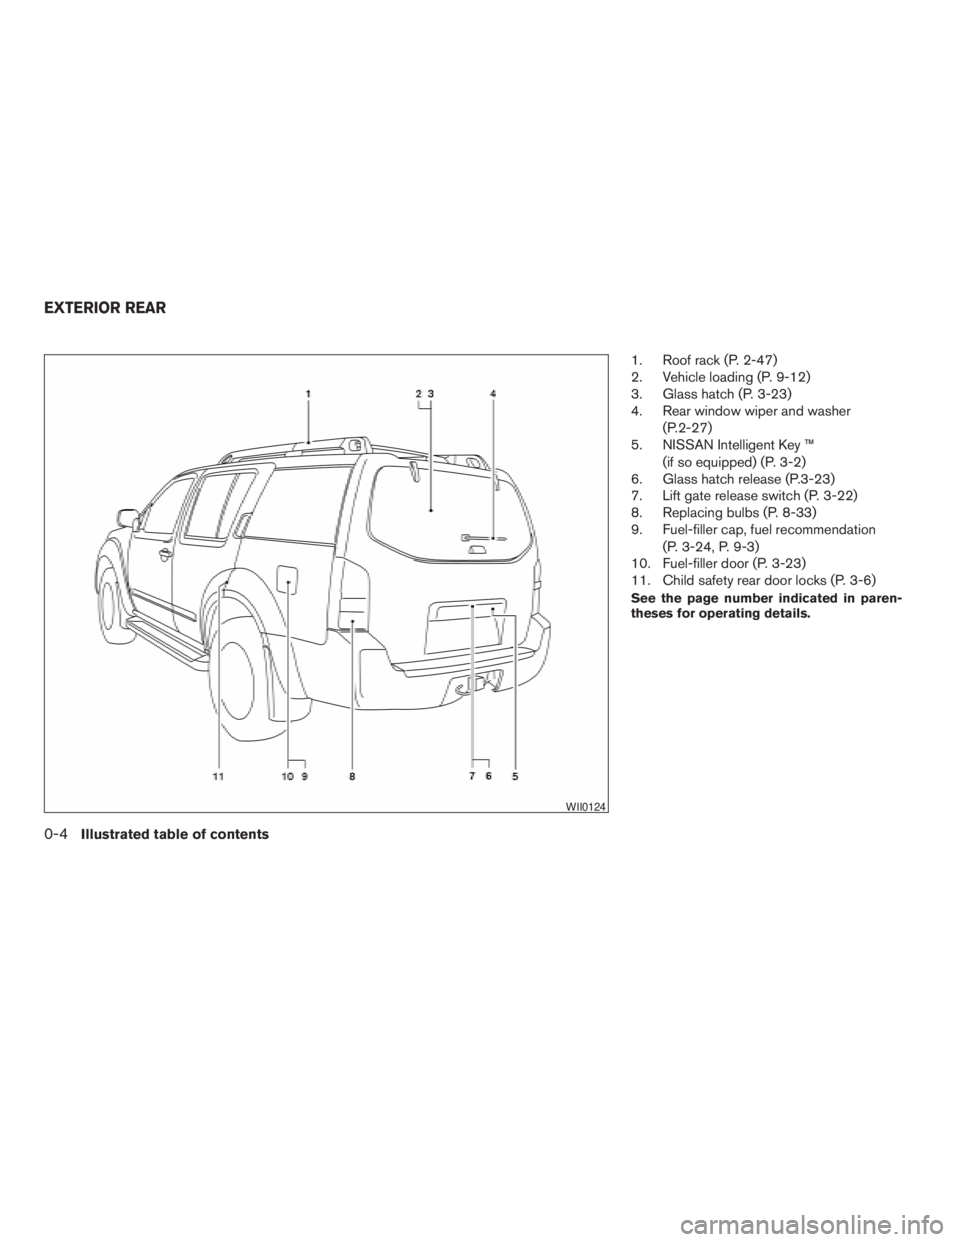 NISSAN PATHFINDER 2009  Owner´s Manual 1. Roof rack (P. 2-47)
2. Vehicle loading (P. 9-12)
3. Glass hatch (P. 3-23)
4. Rear window wiper and washer
(P.2-27)
5. NISSAN Intelligent Key ™
(if so equipped) (P. 3-2)
6. Glass hatch release (P.